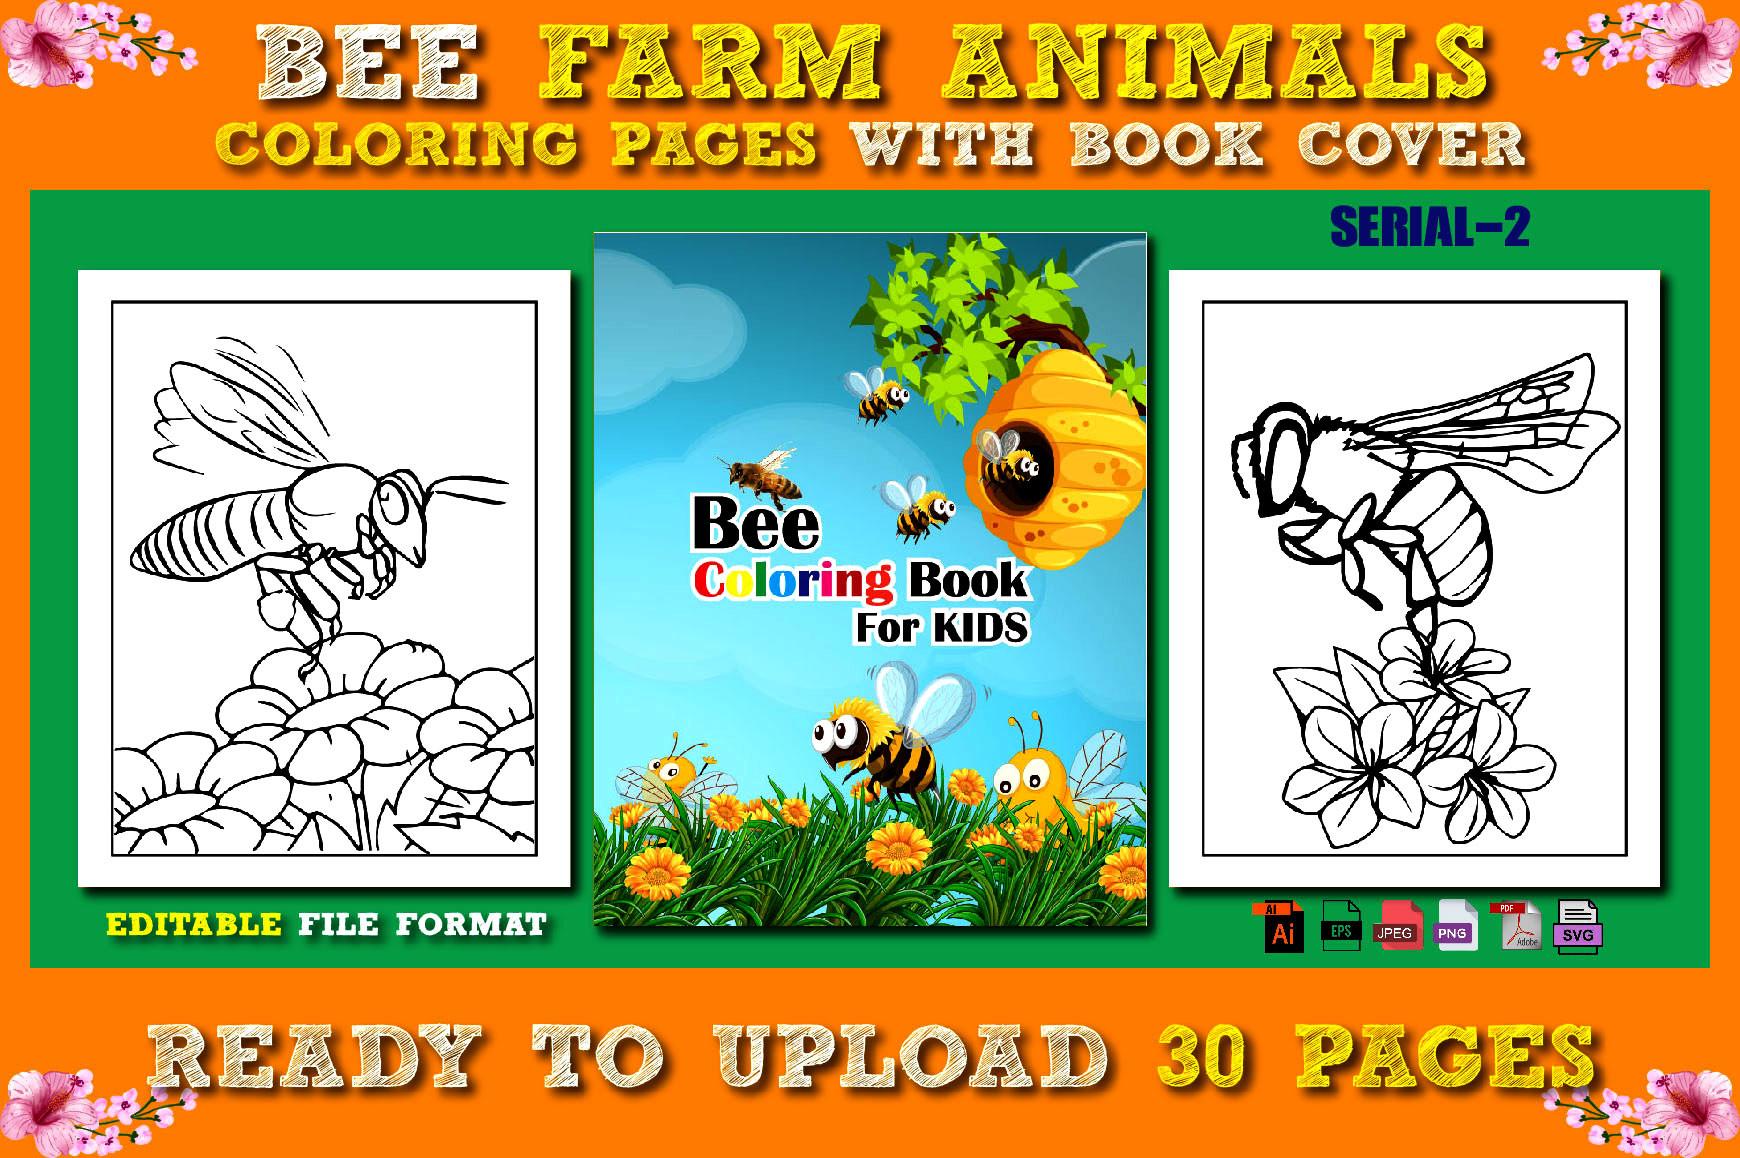 Bee Farm Animals Coloring Pages